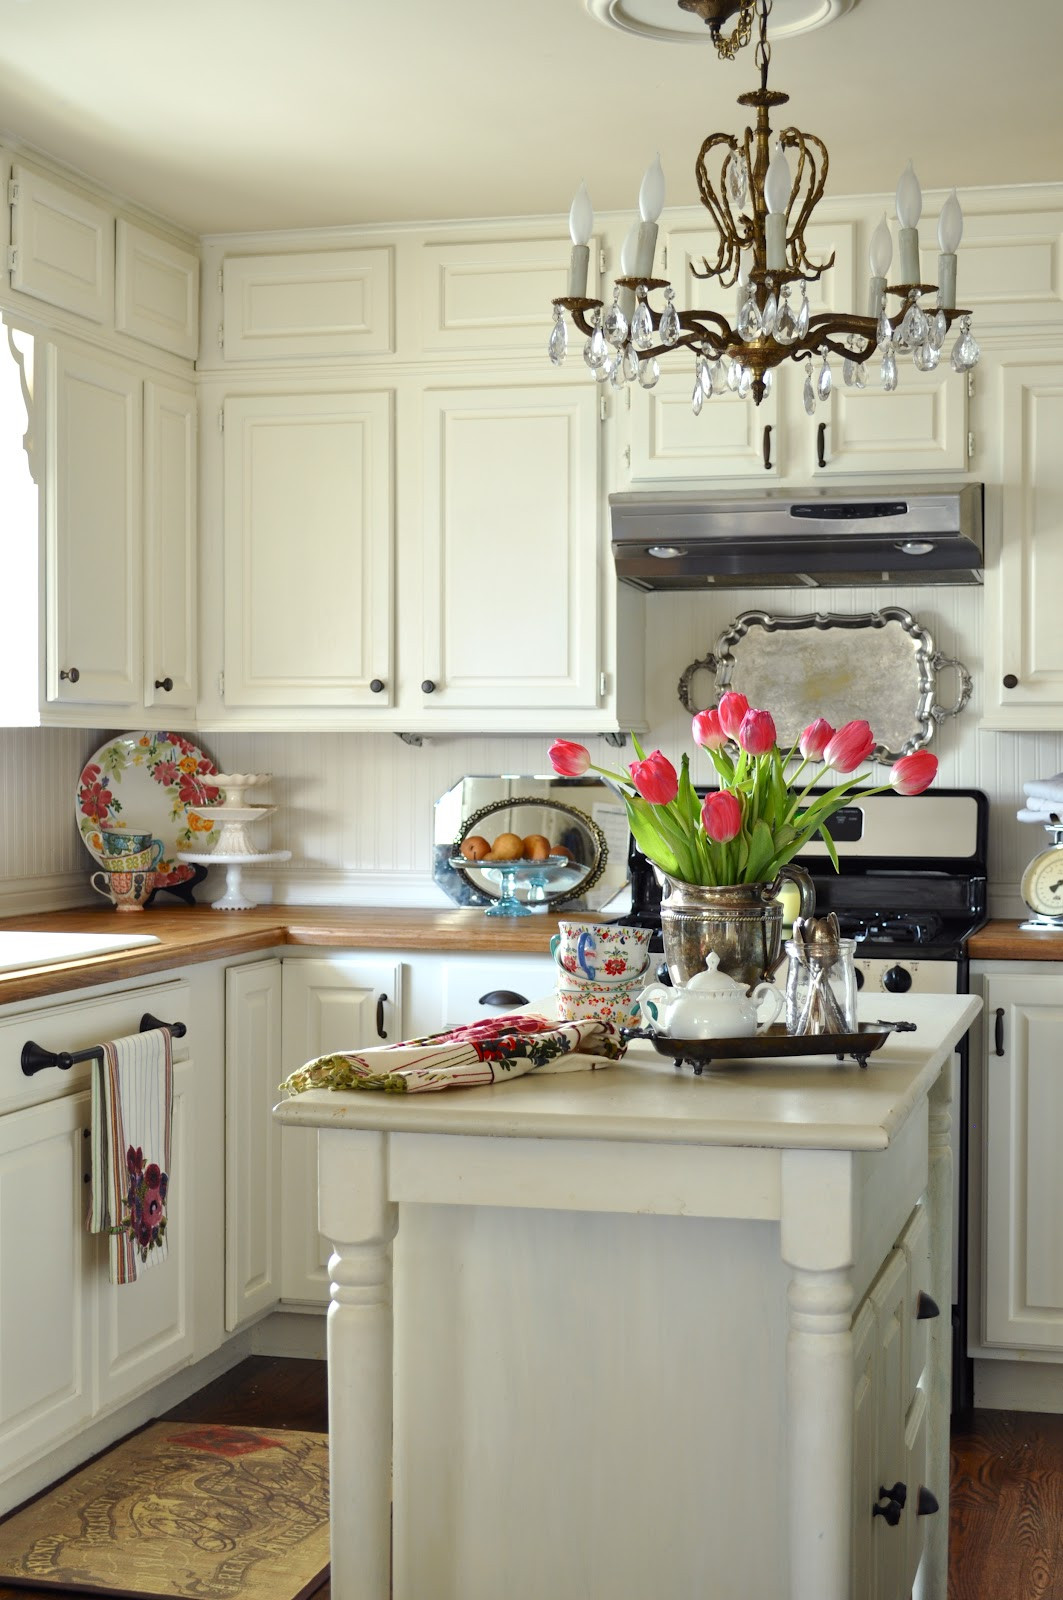 Small Cottage Kitchen Ideas
 30 Timeless Cottage Kitchen Designs For A New Look